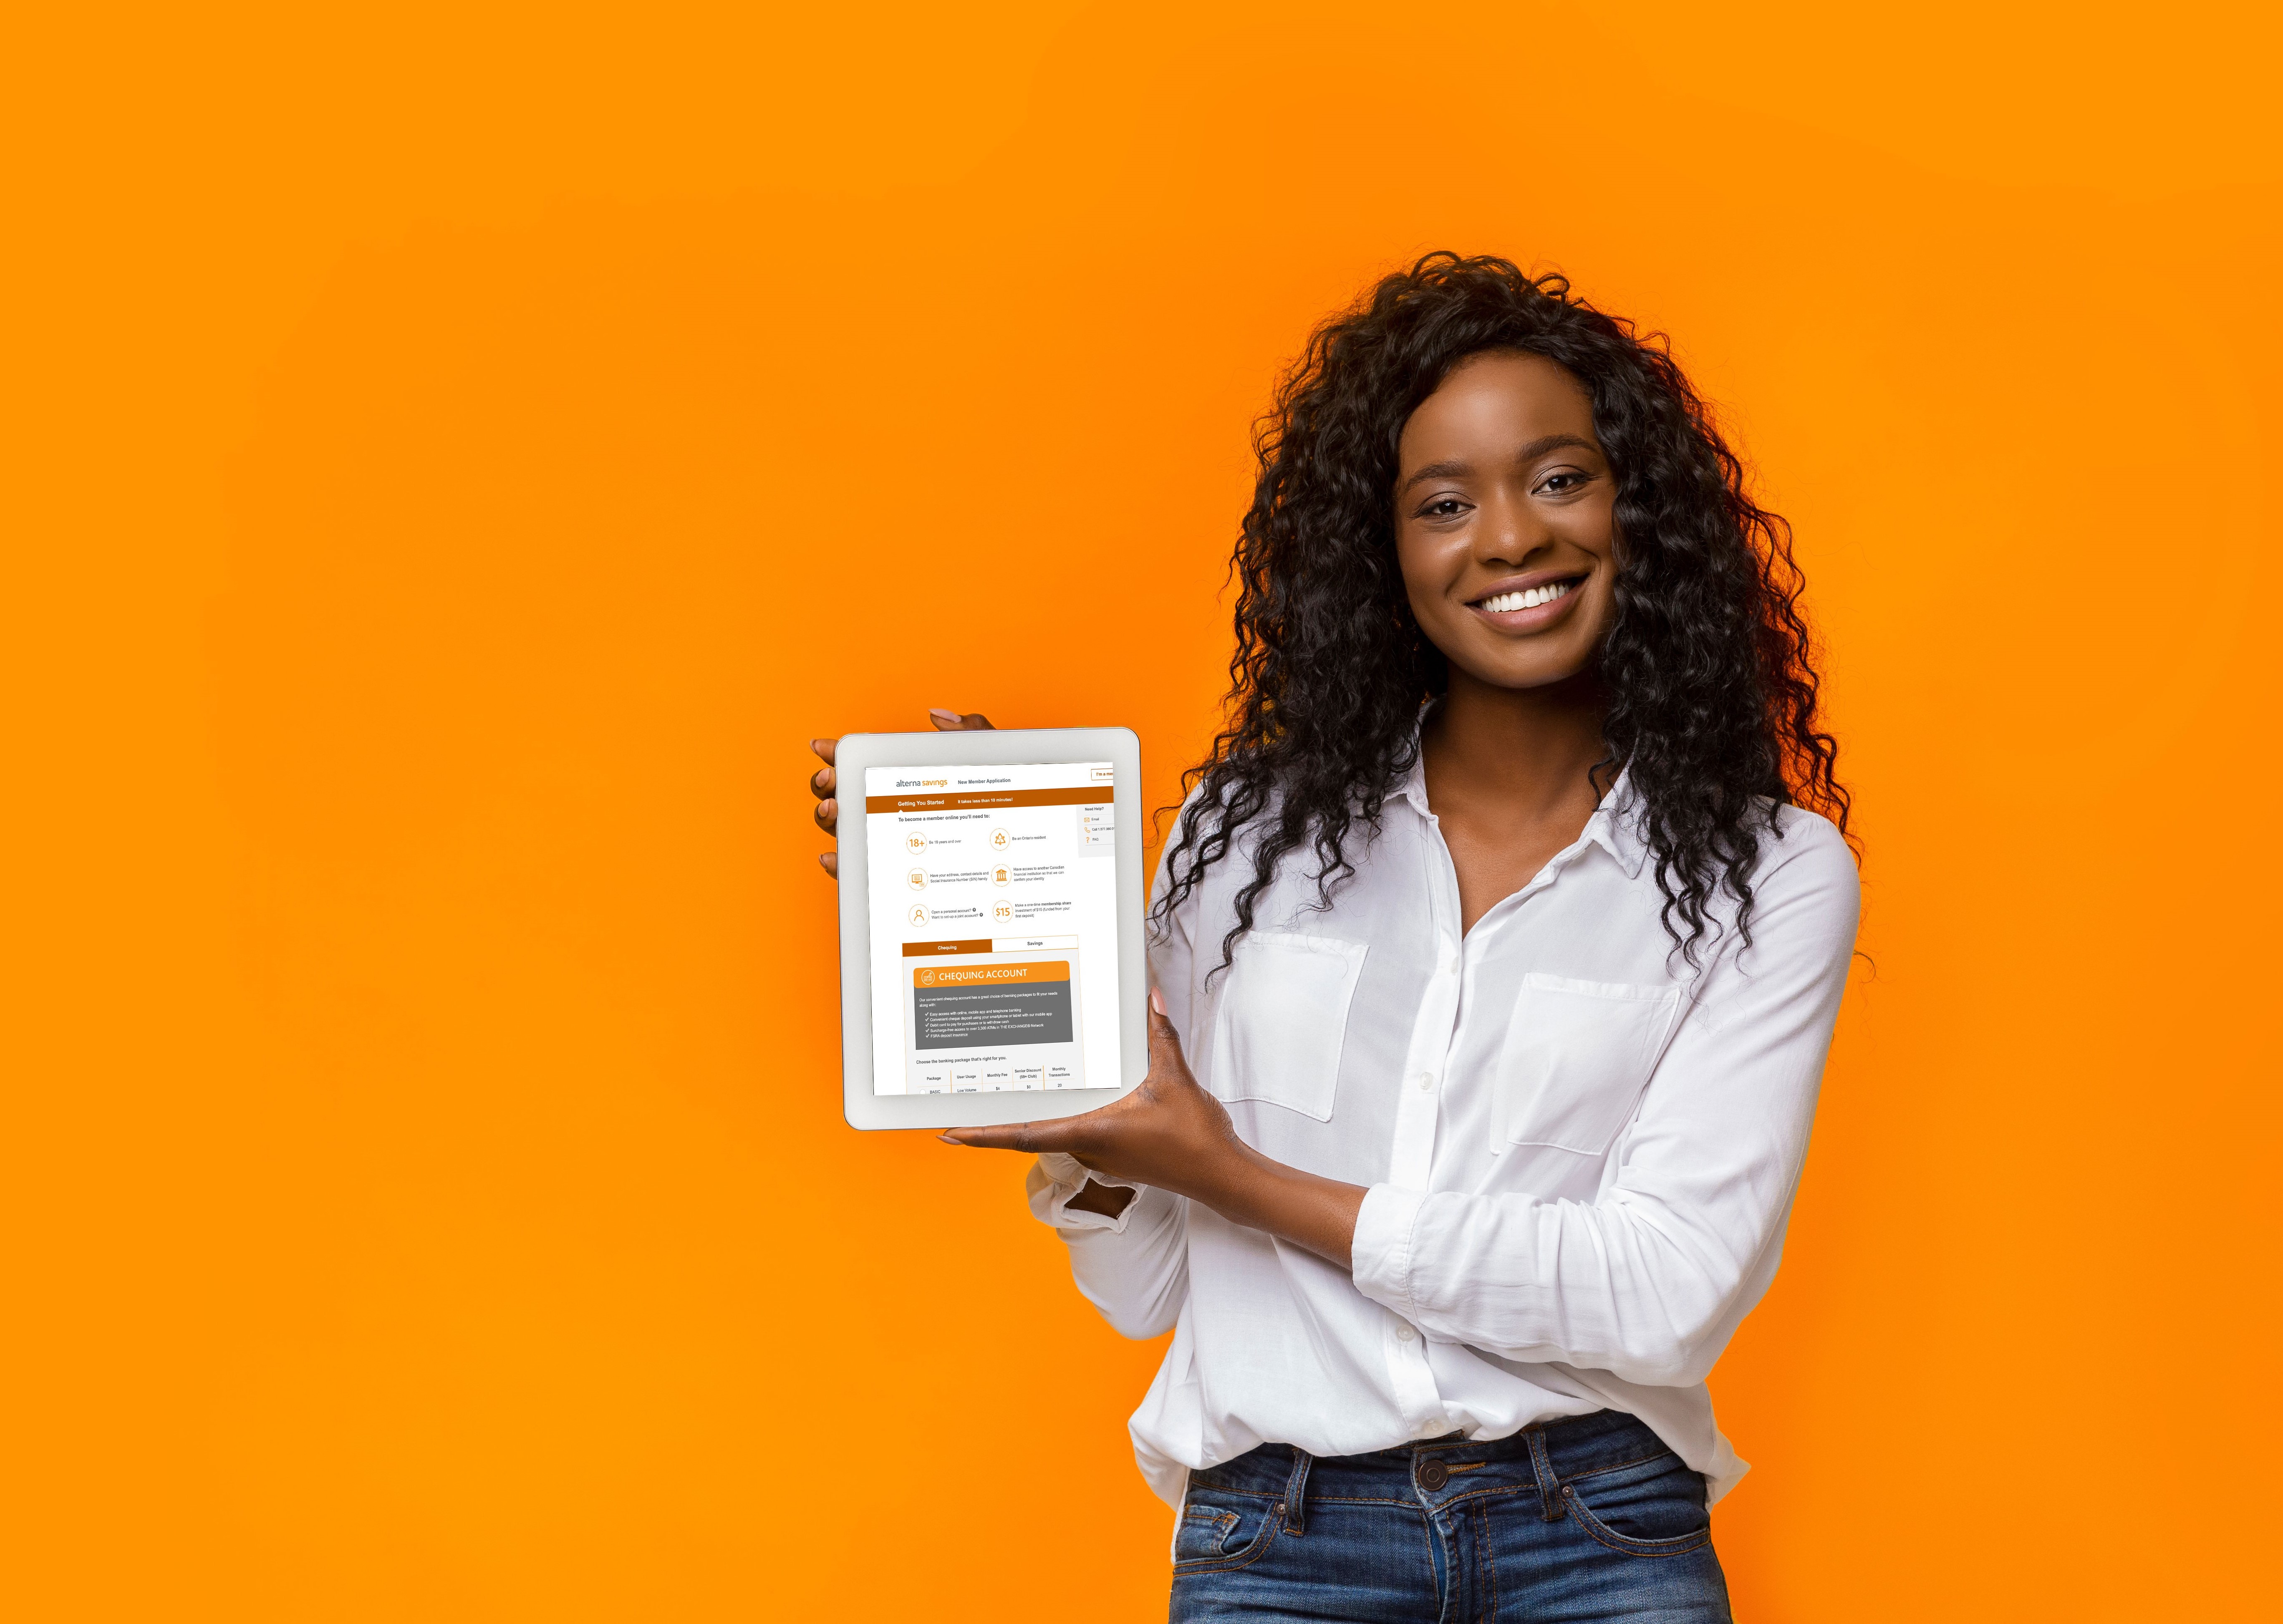 Smiling black woman with a tablet